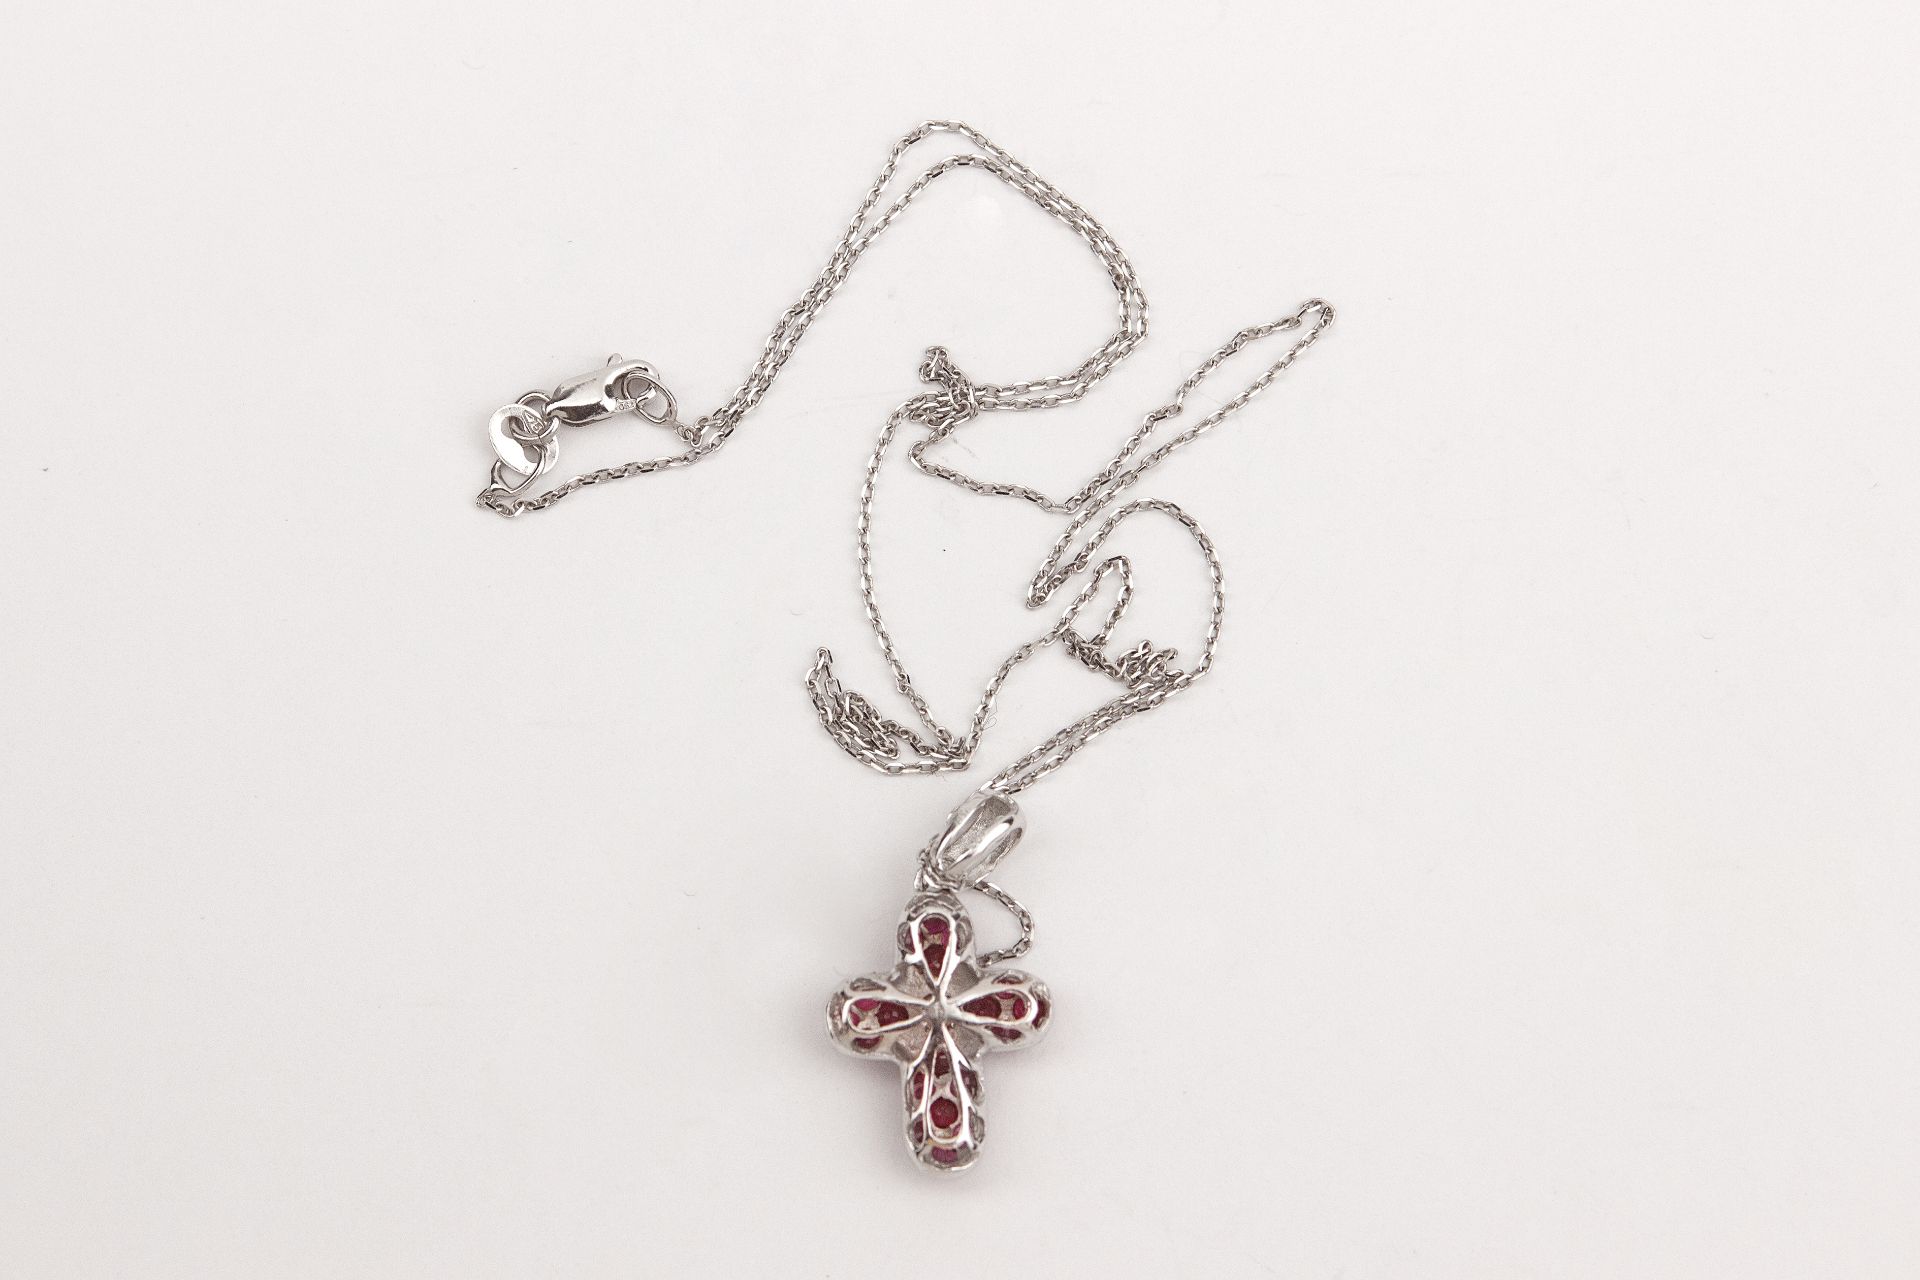 An 18k. white gold and rubies pendant cross and chain - Image 2 of 2